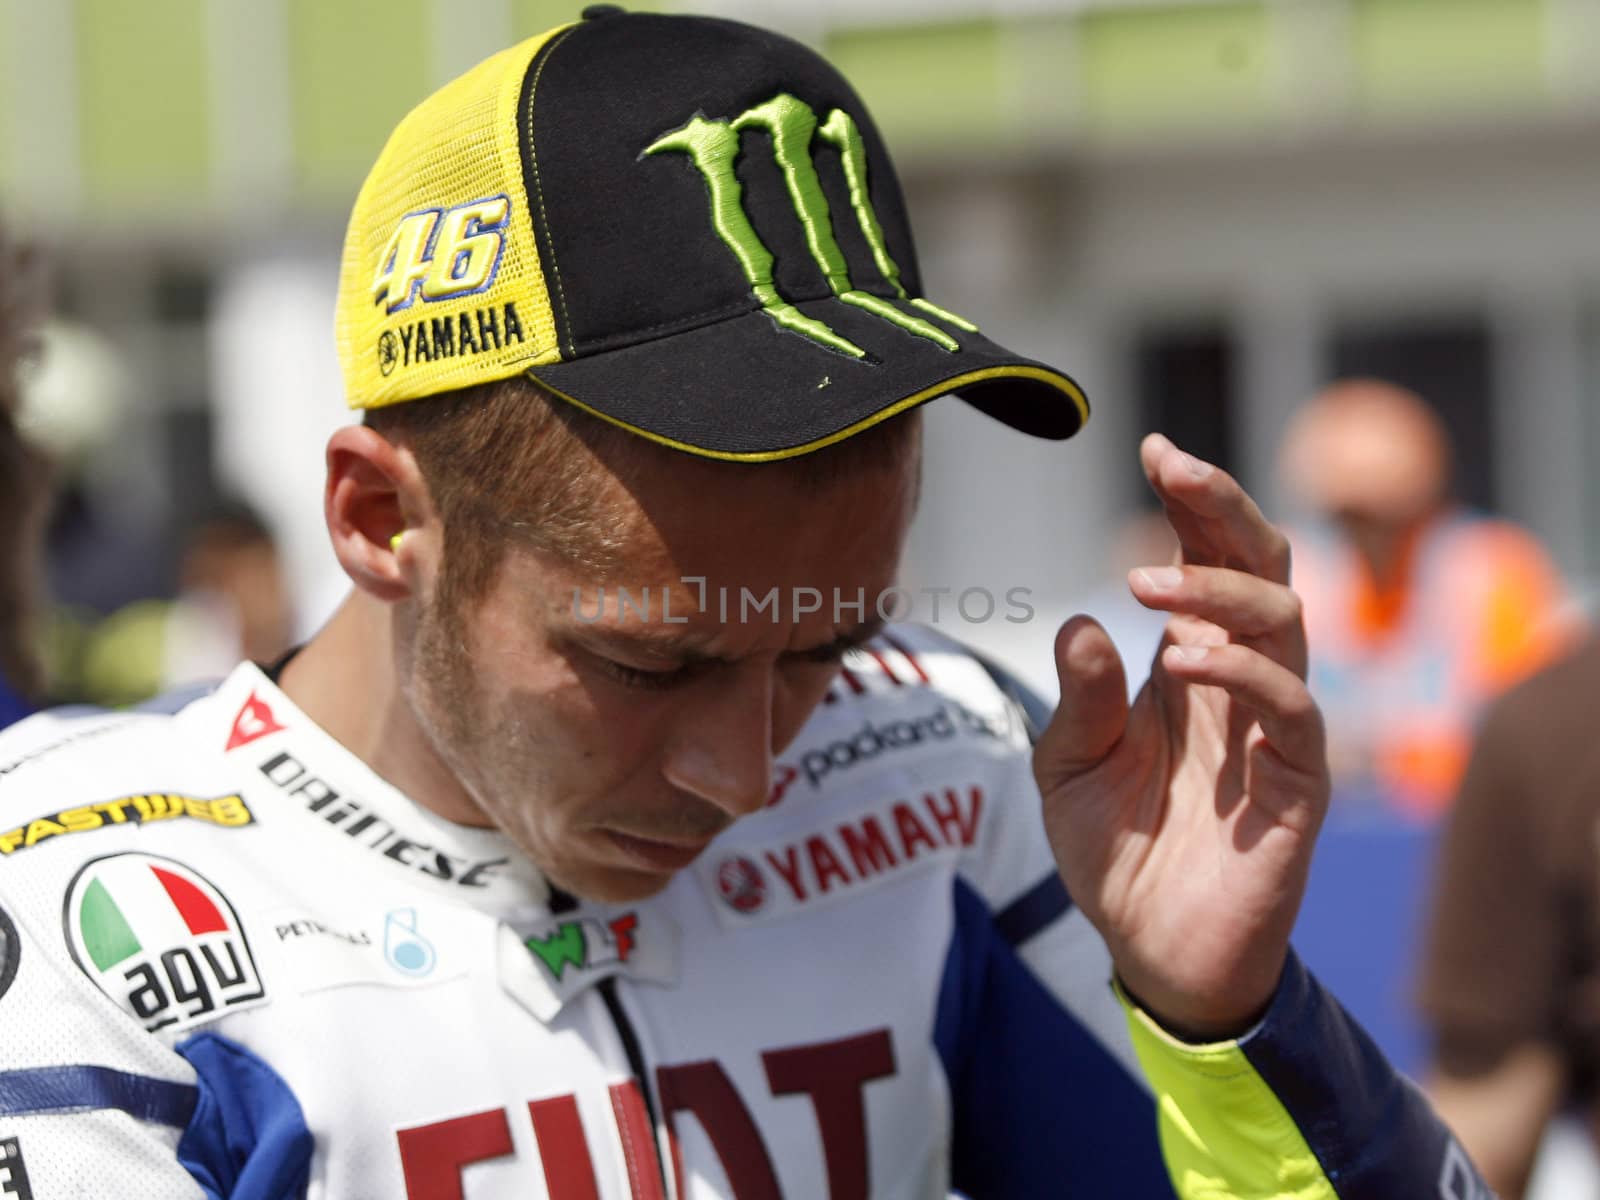 Valentino Rossi at the Masaryk circuit arrived fifth on Sunday,15th August, in Brno, Czech republic. He announced the change of the Yamaha team for Ducati.